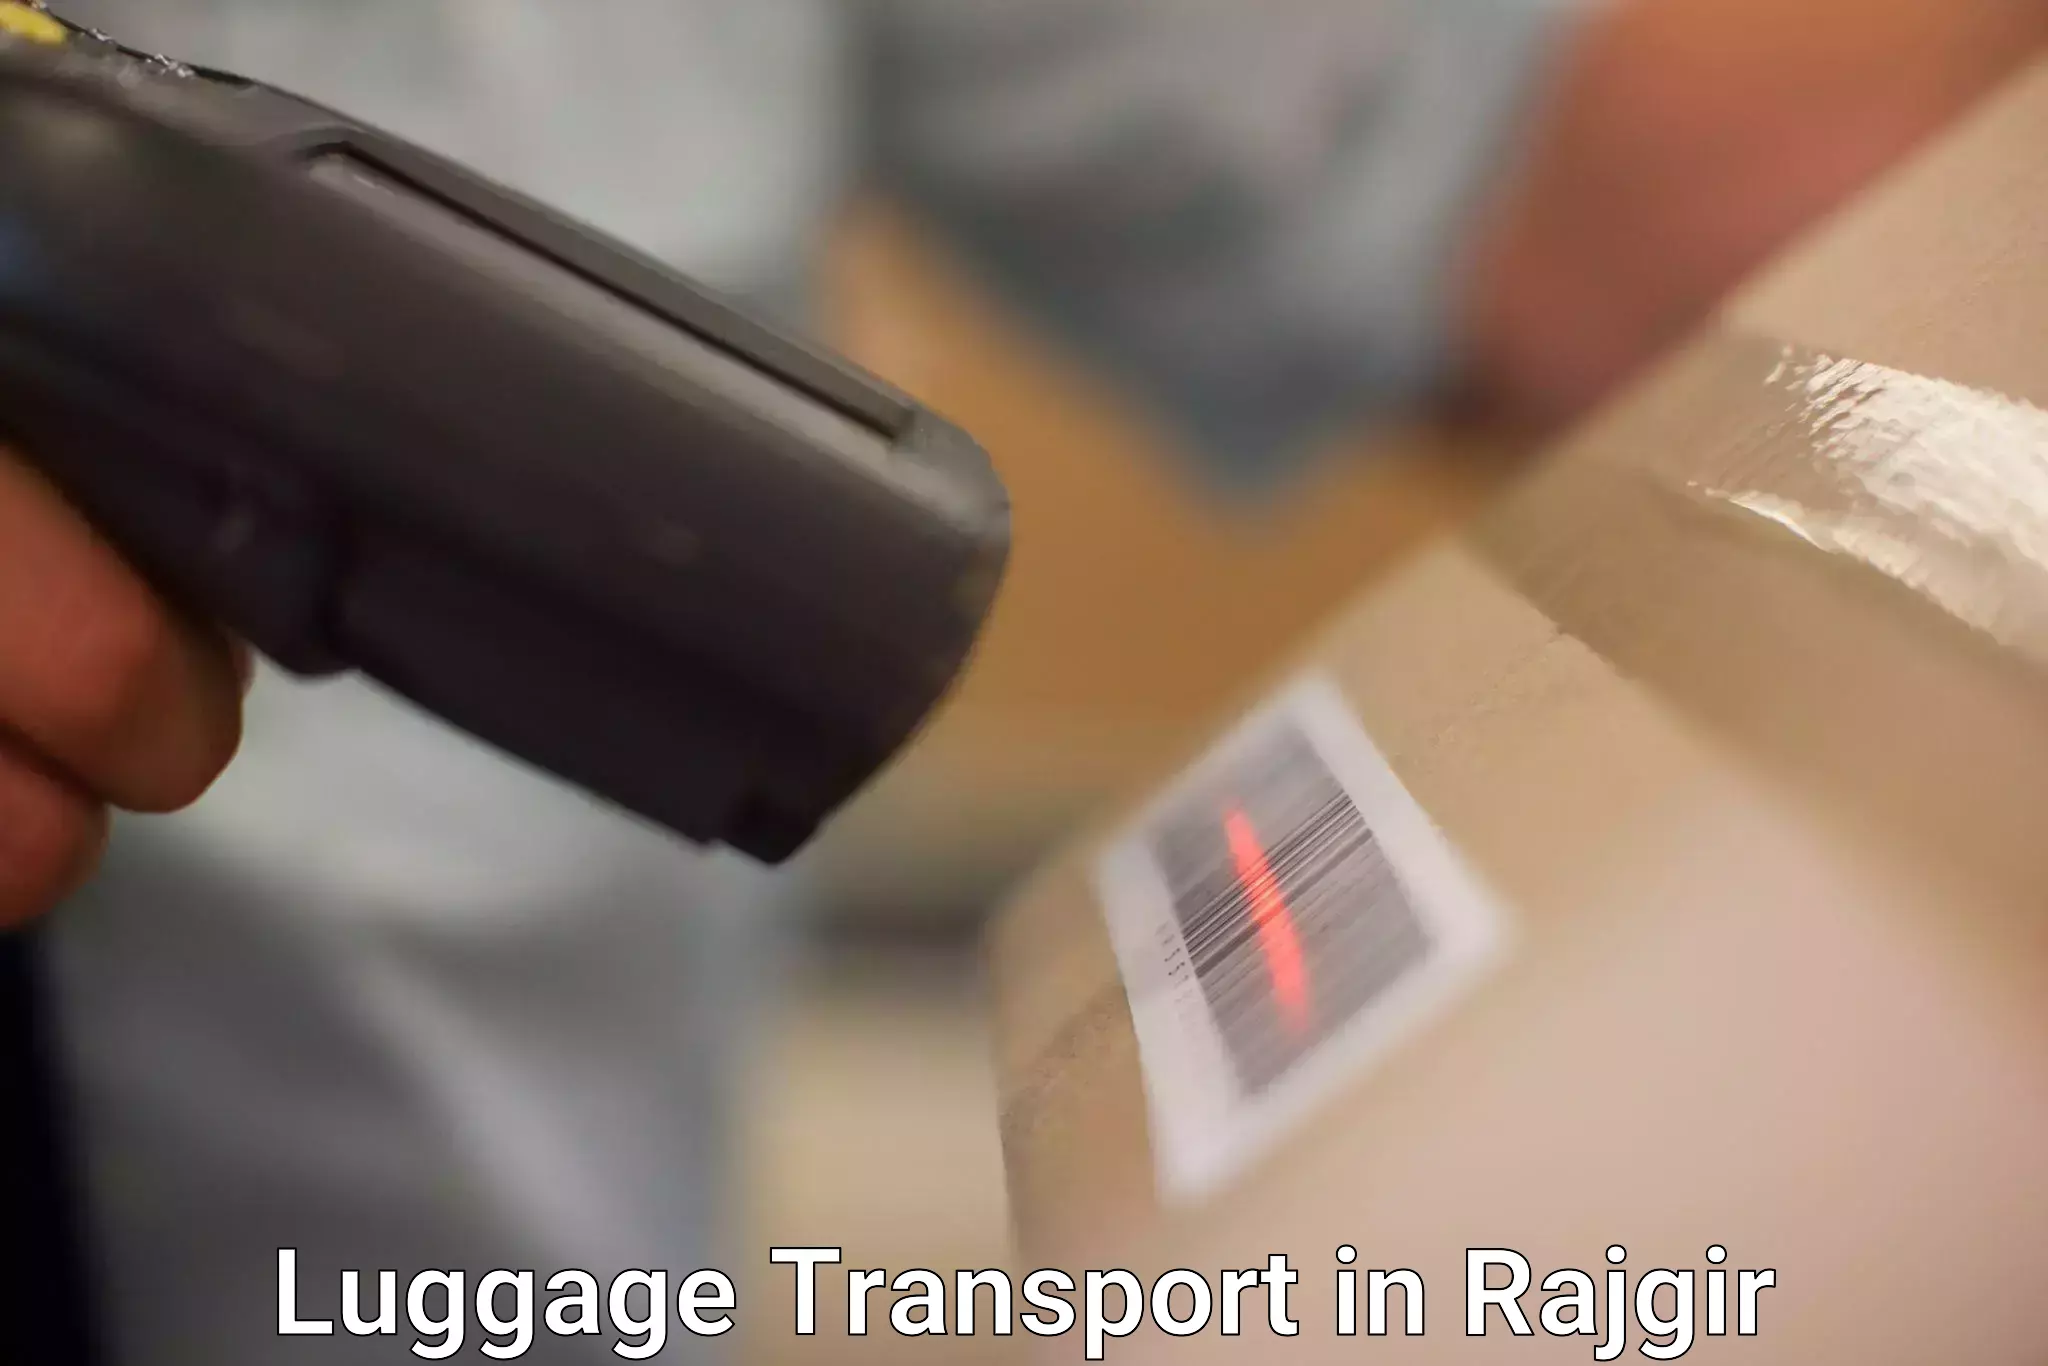 Luggage delivery estimate in Rajgir